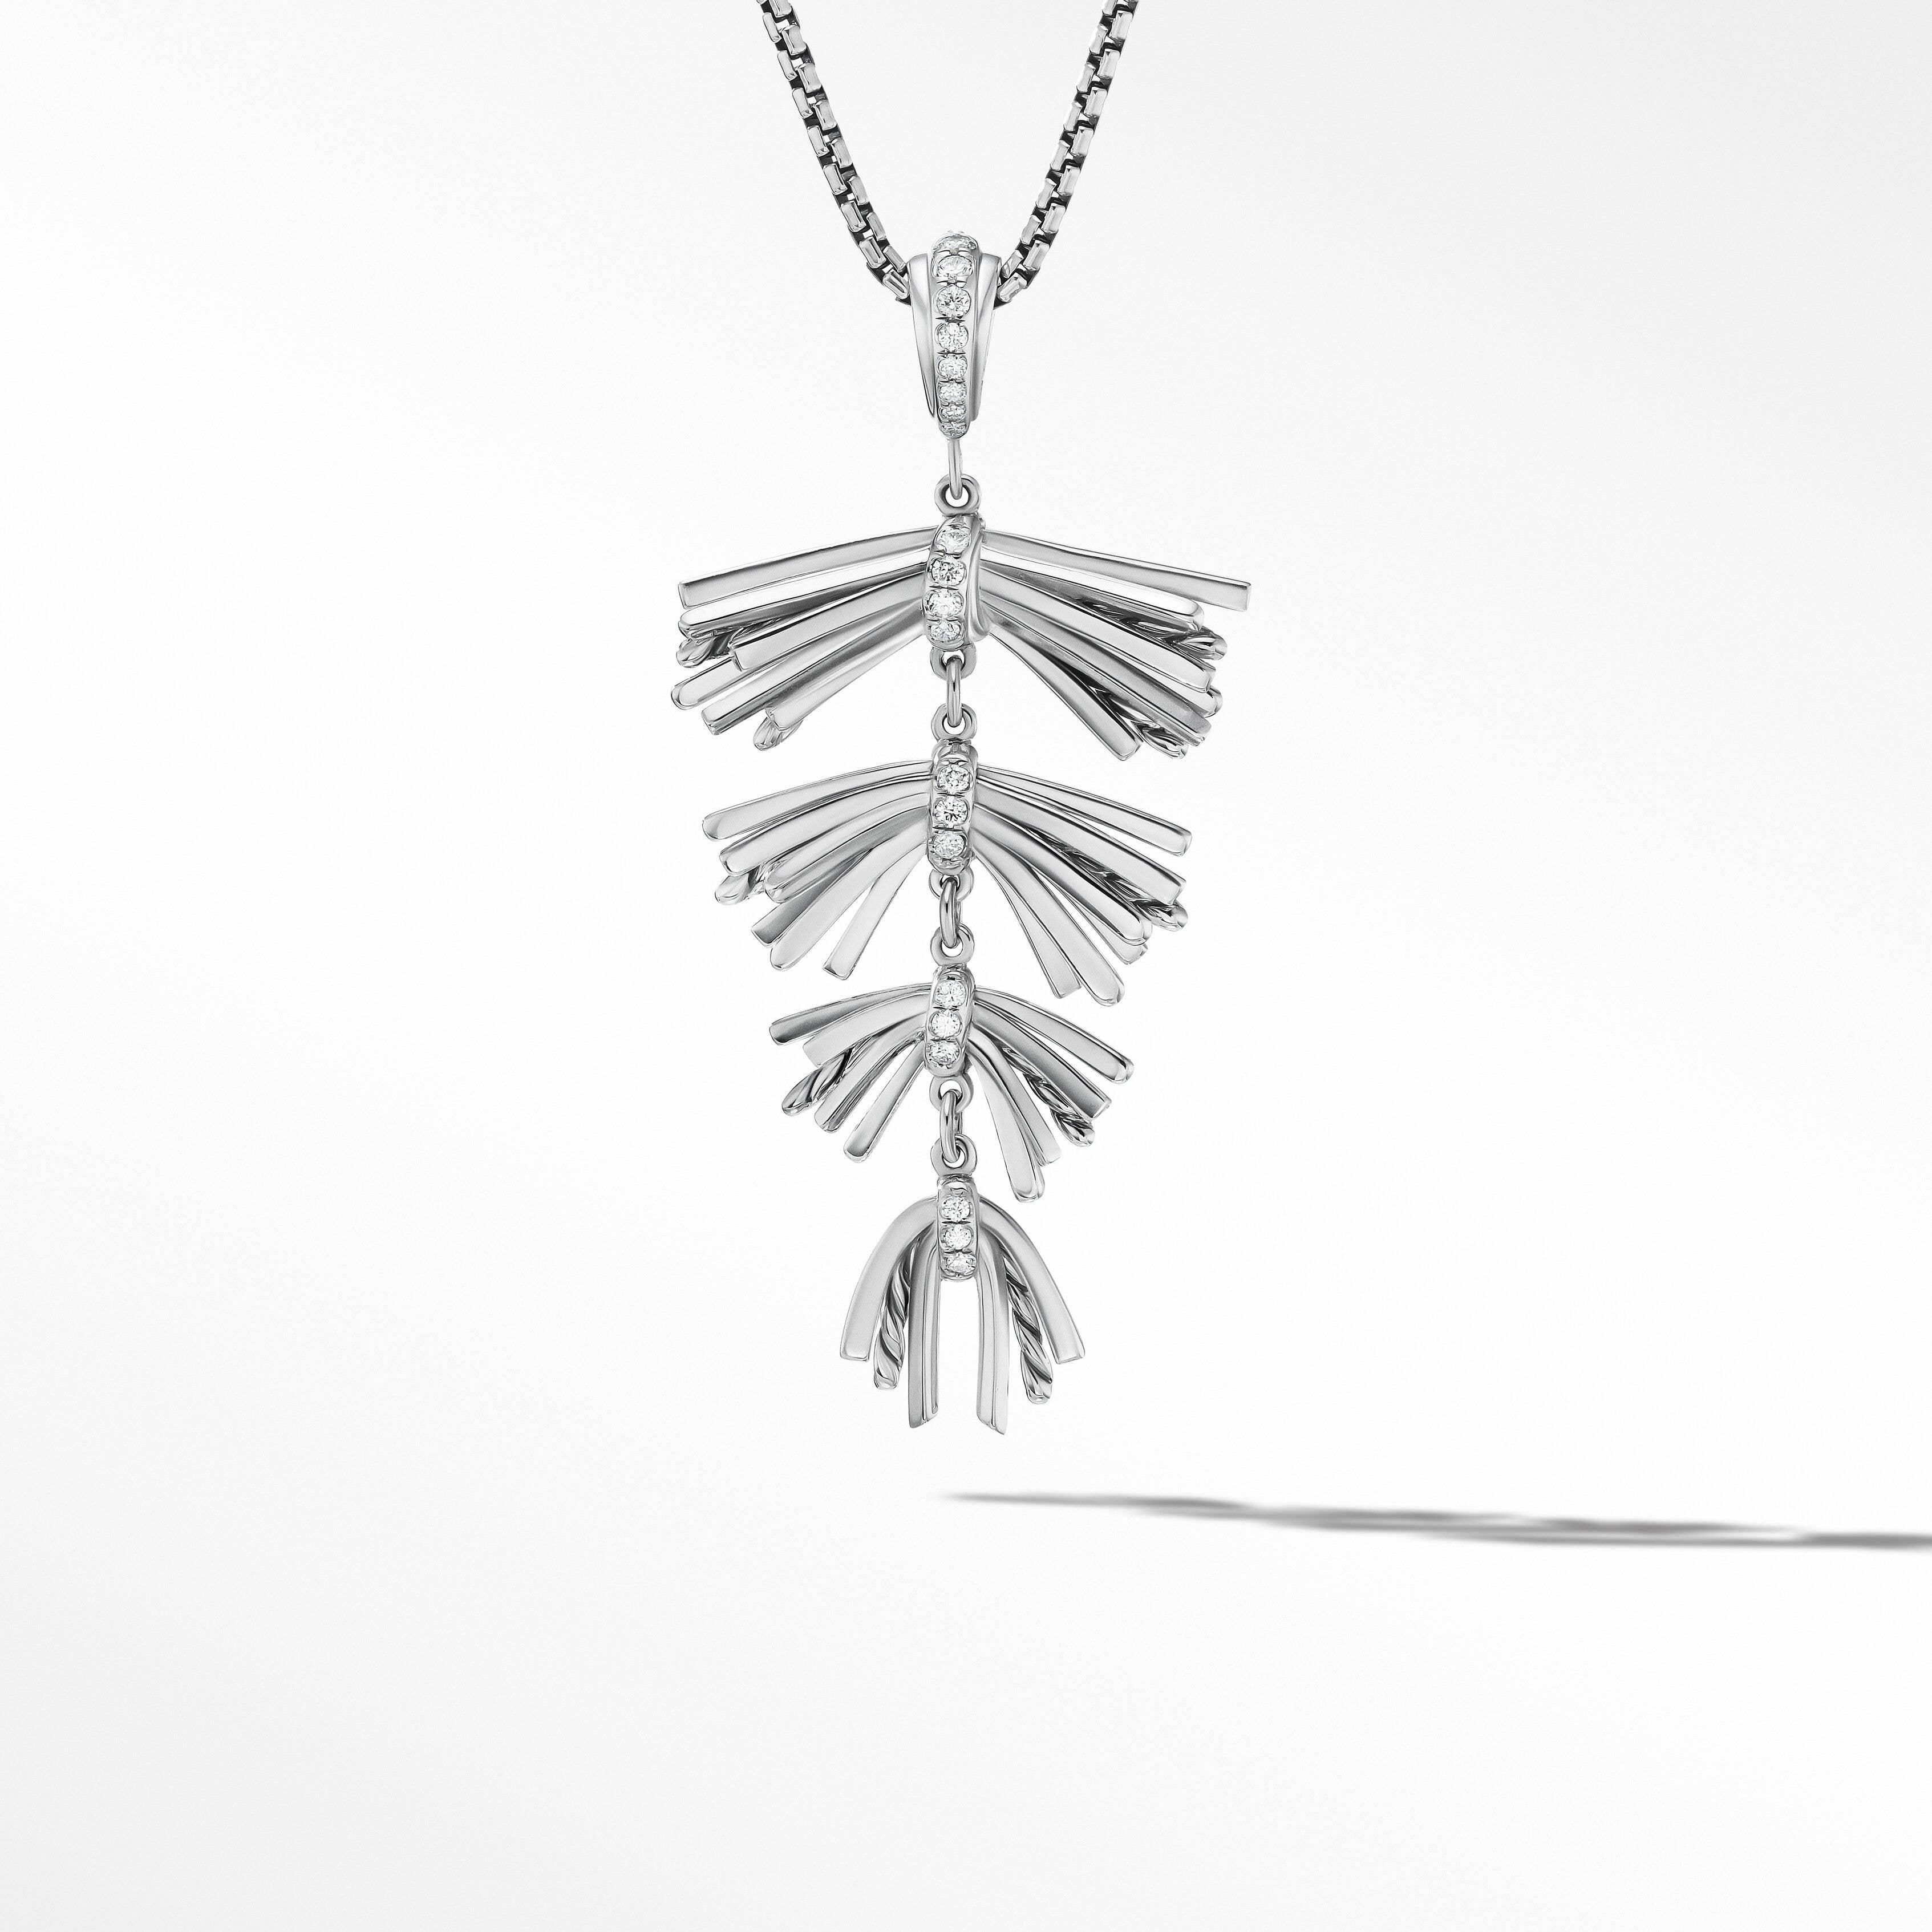 Angelika™ Fringe Pendant Necklace in Sterling Silver with Pavé Diamonds